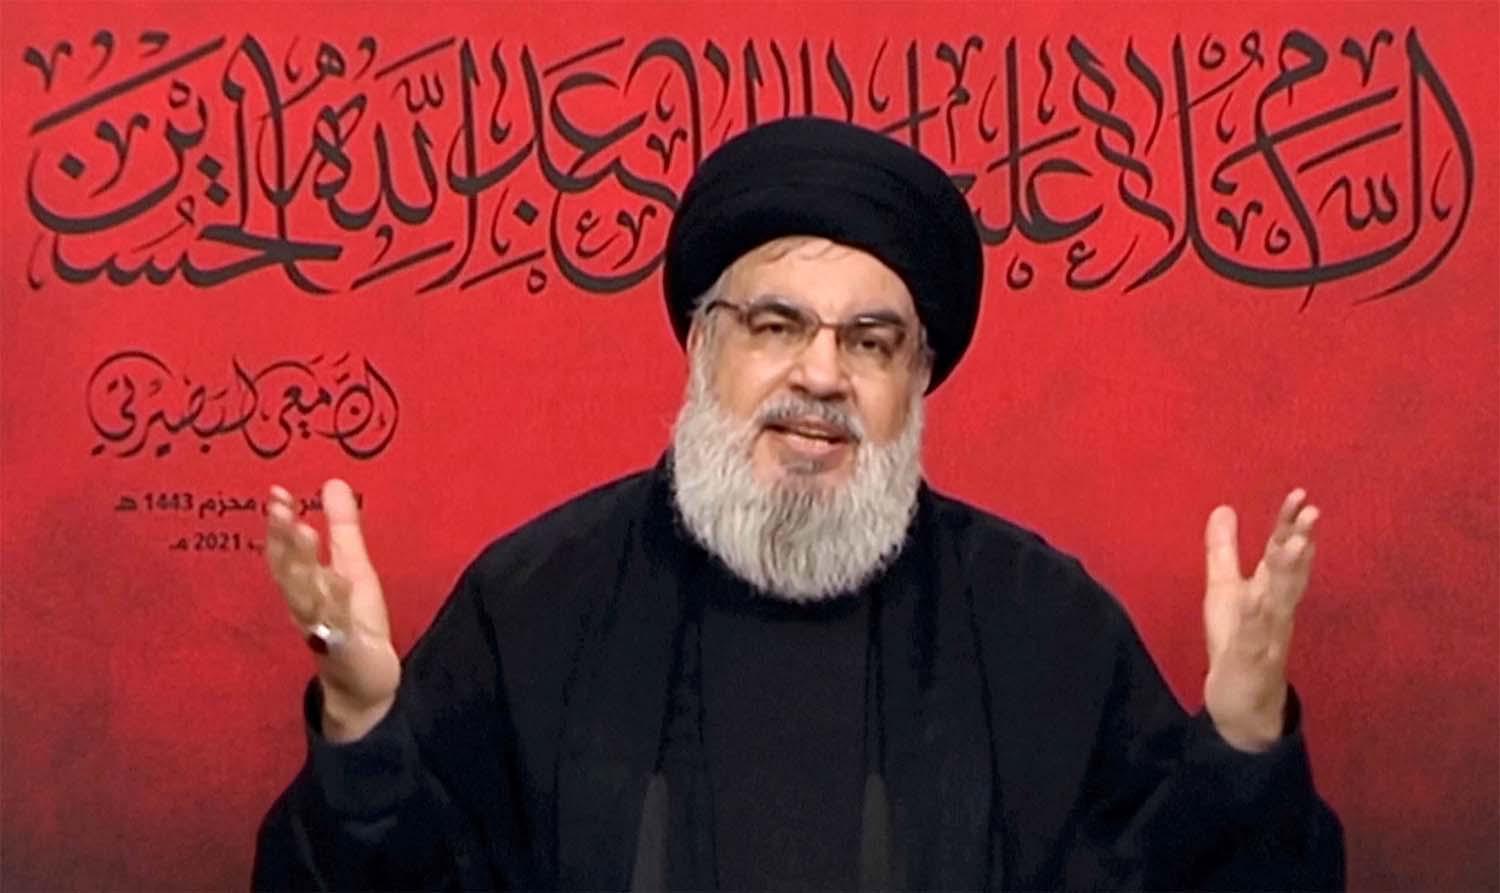 Nasrallah said Iran was prepared to accept payment in the Lebanese currency